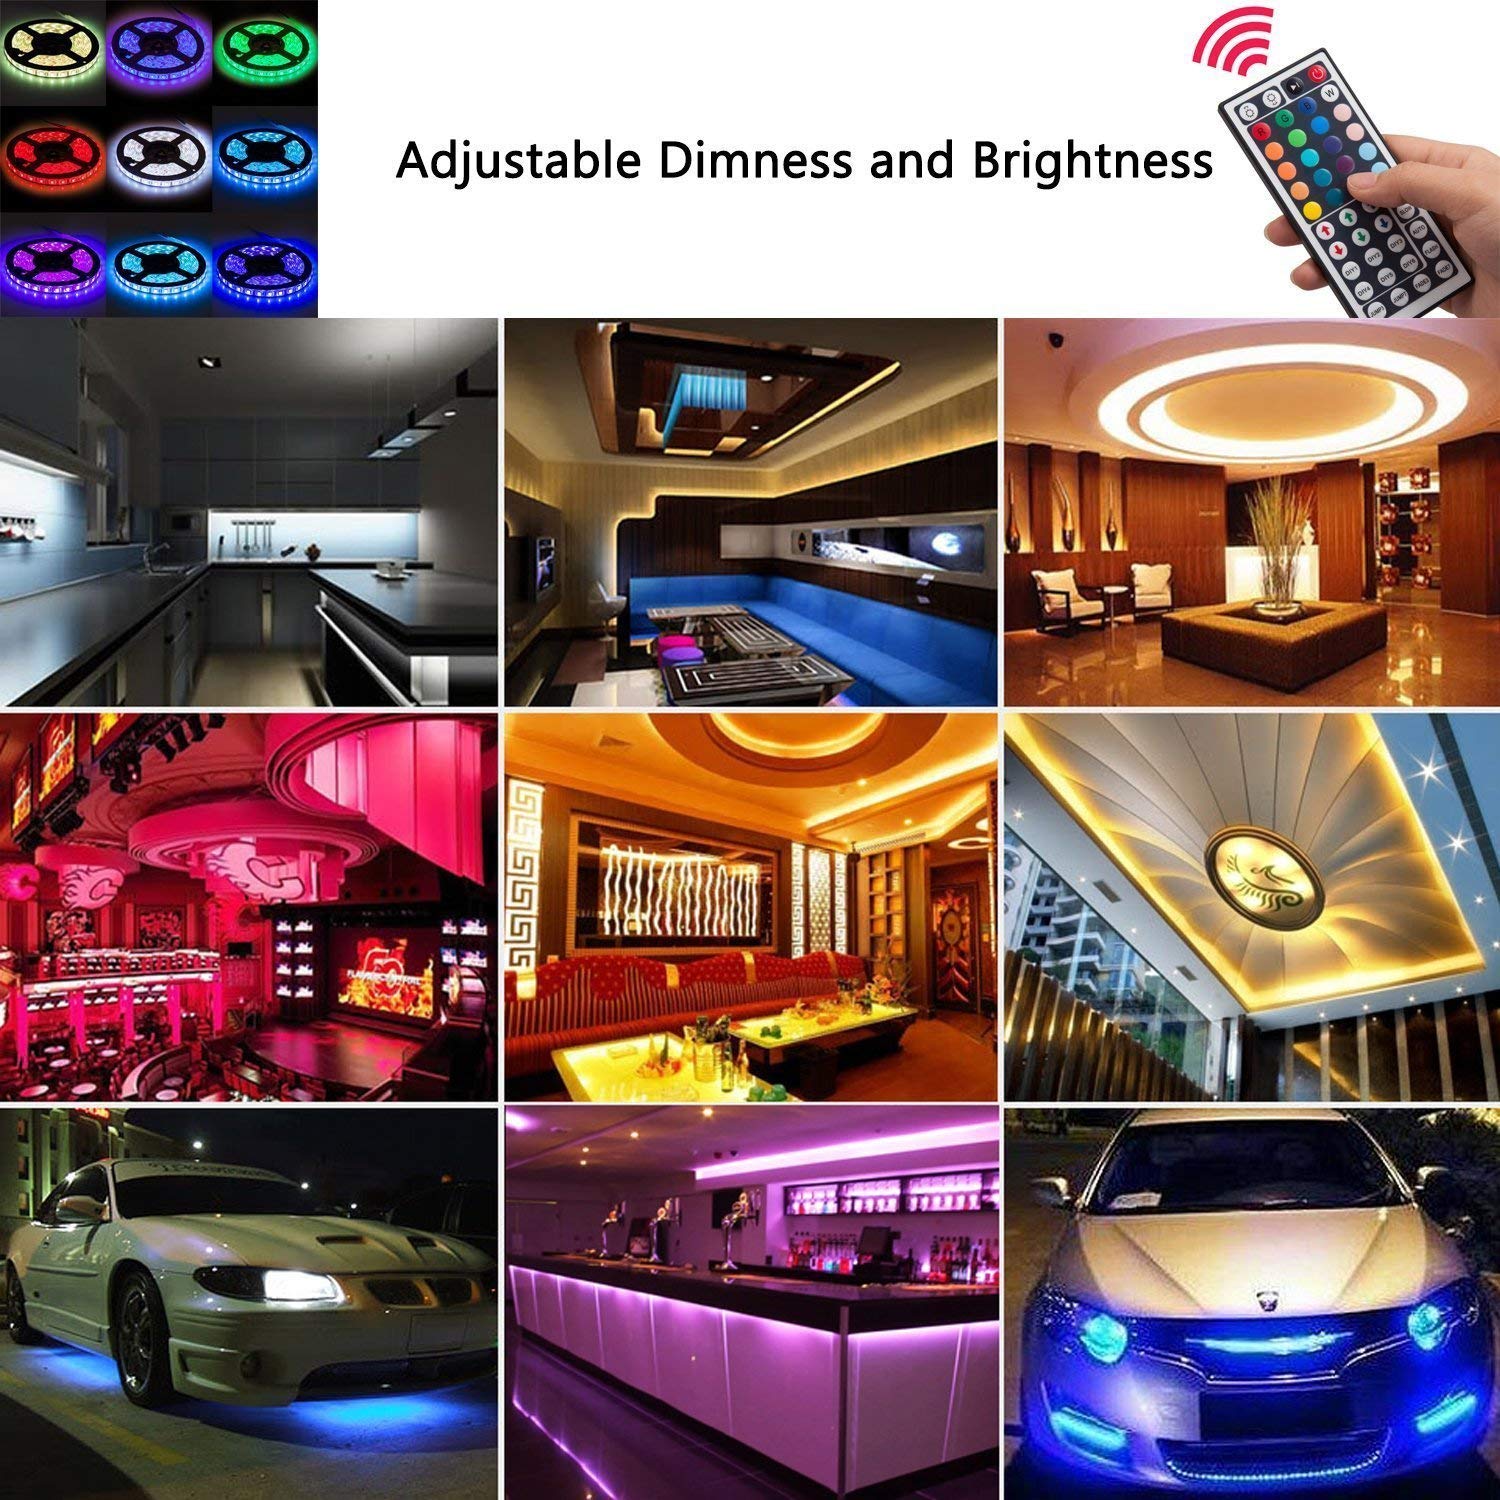 SUPERNIGHT LED Strip Lights, 16.4Ft RGB Color Changing SMD5050 300 LEDs Flexible Light Strip Waterproof Kit with 44 Key Remote Controller and 12V 5A Power Supply